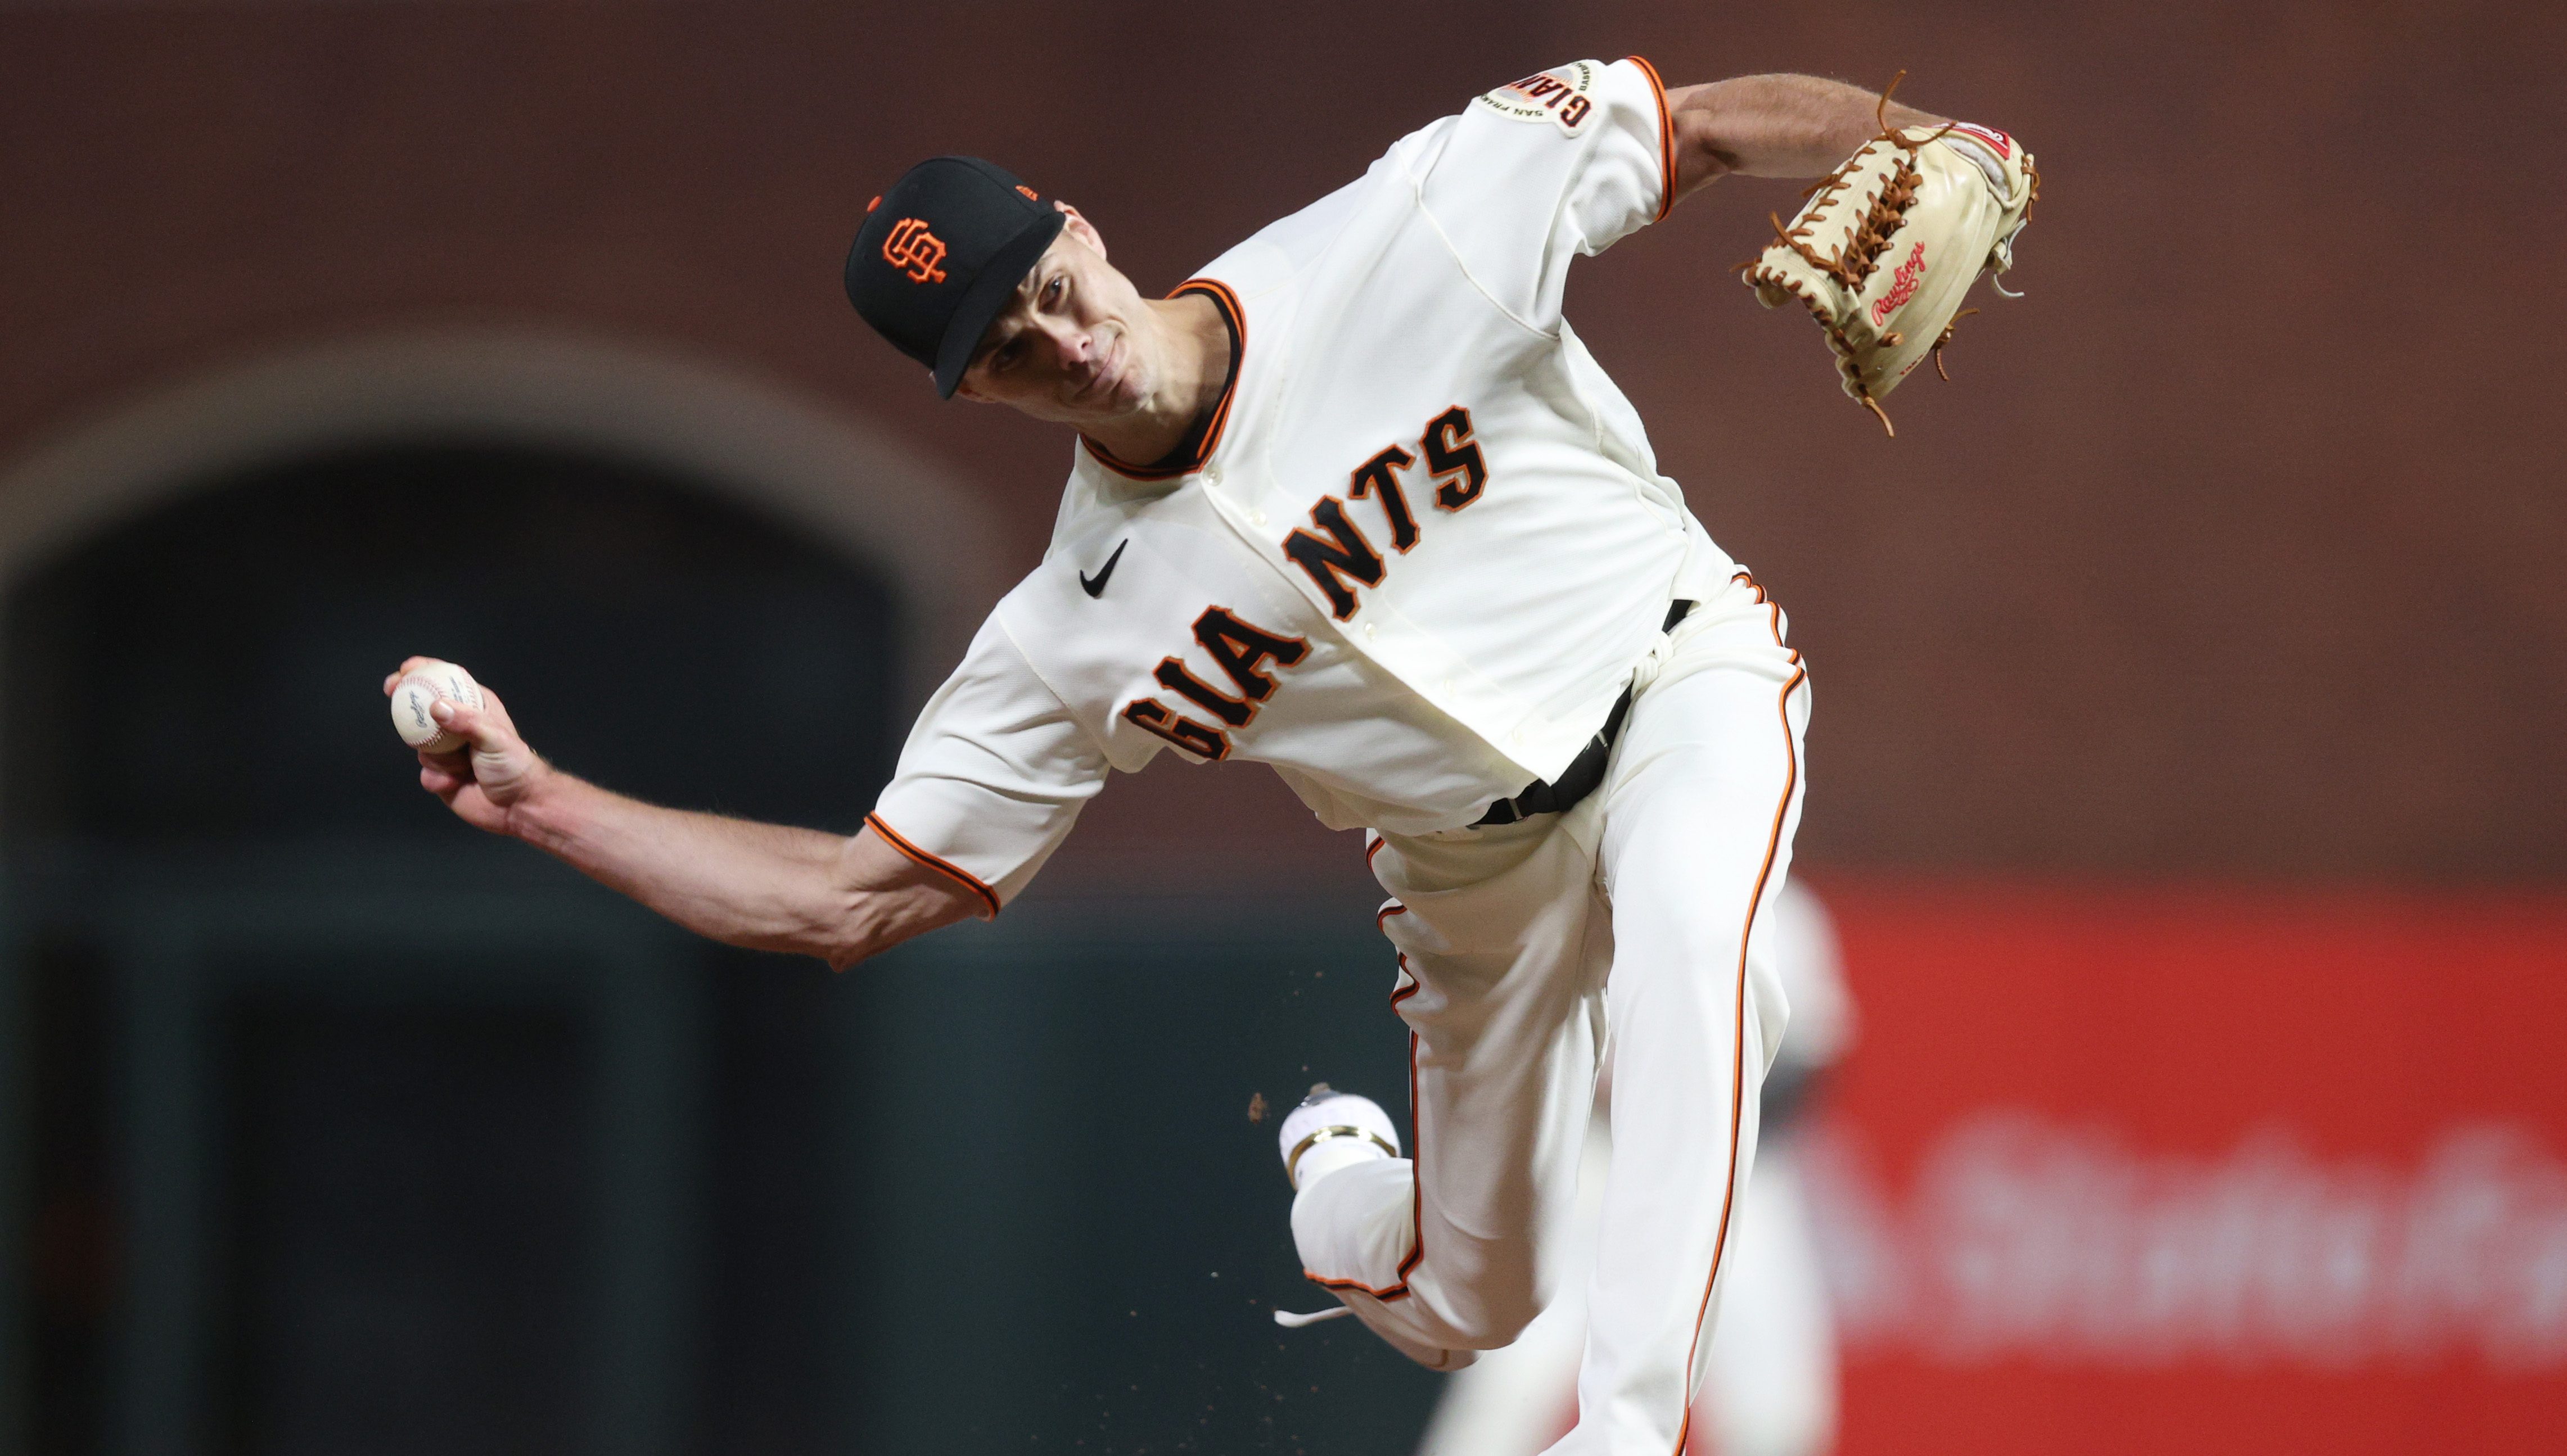 The Giants have one of the best and worst road uniforms in baseball